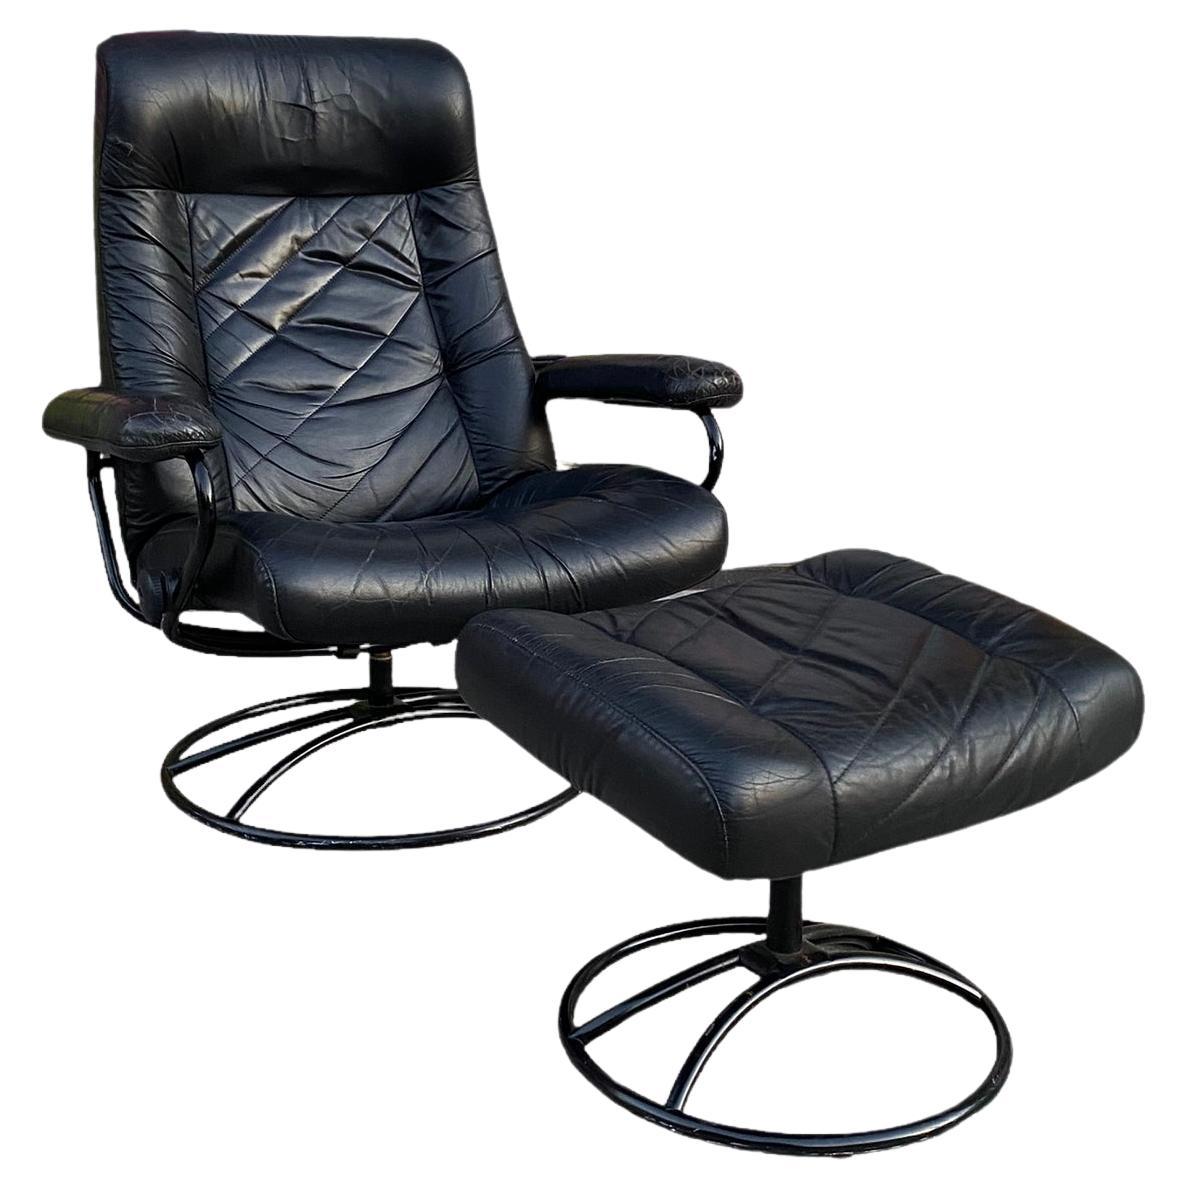 Ekornes Stressless Reclining Lounge Chair and Ottoman in Black